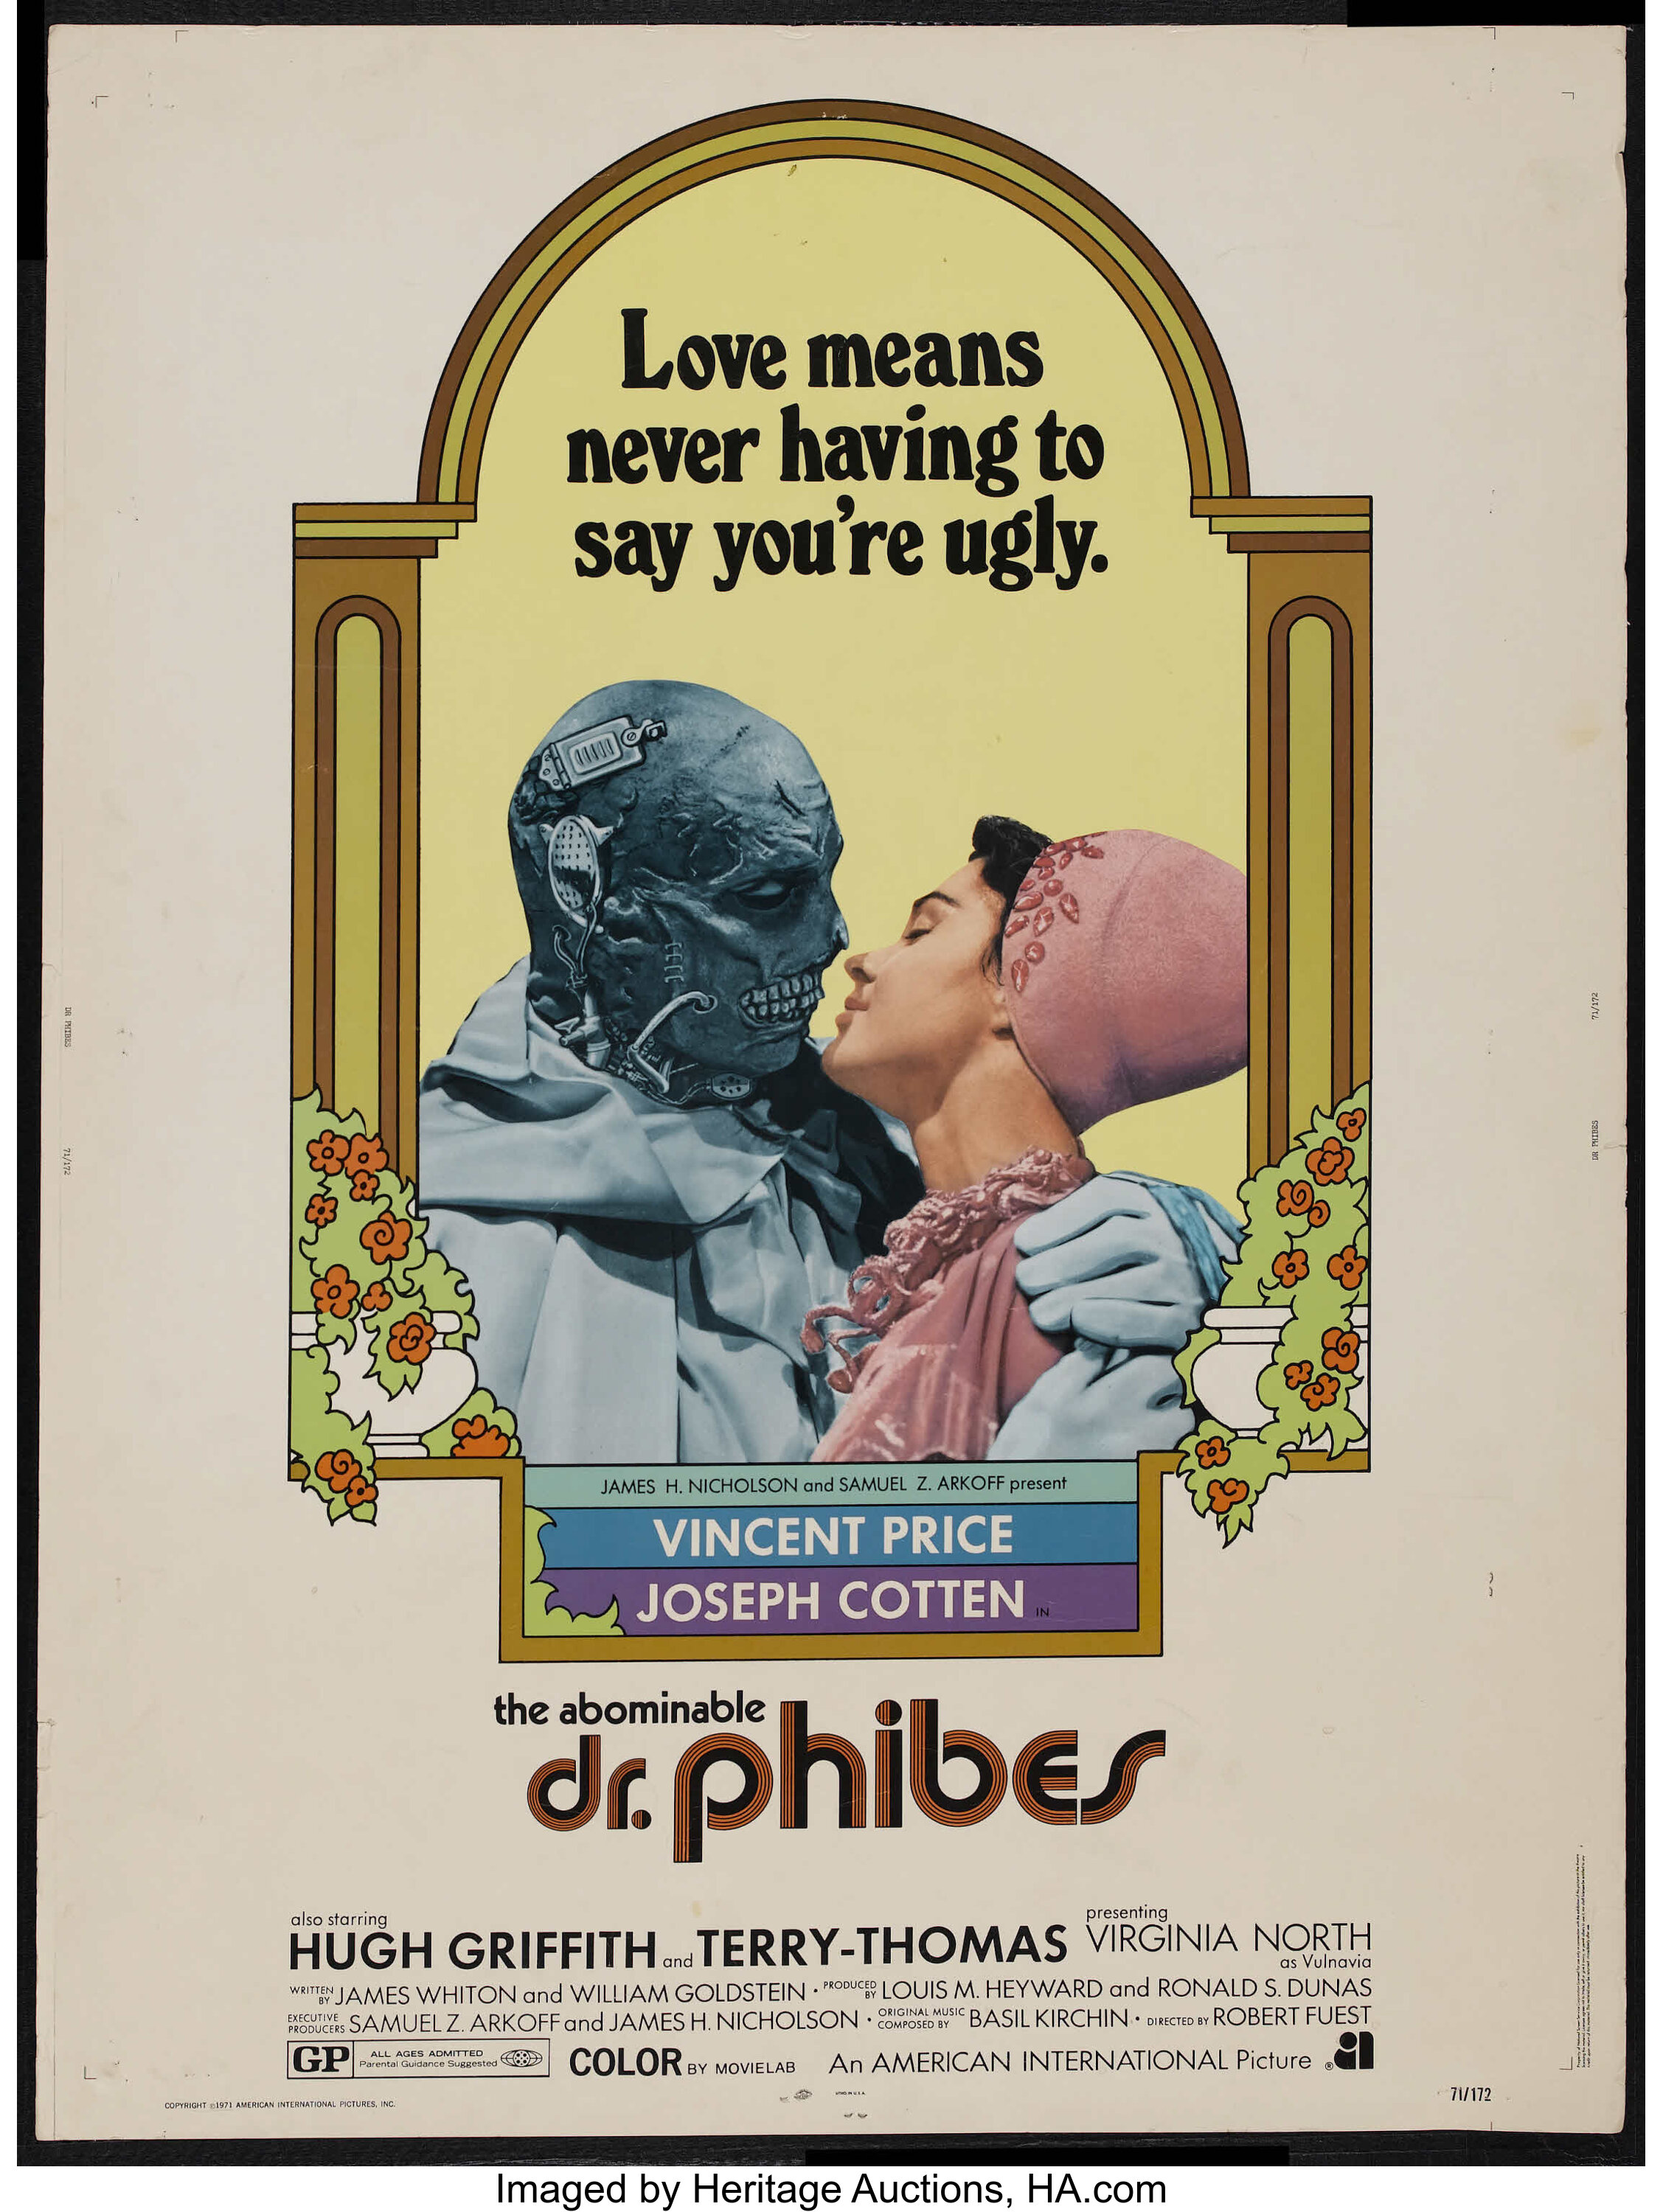 The Abominable Dr Phibes American International 1971 Poster Lot 25005 Heritage Auctions 2695